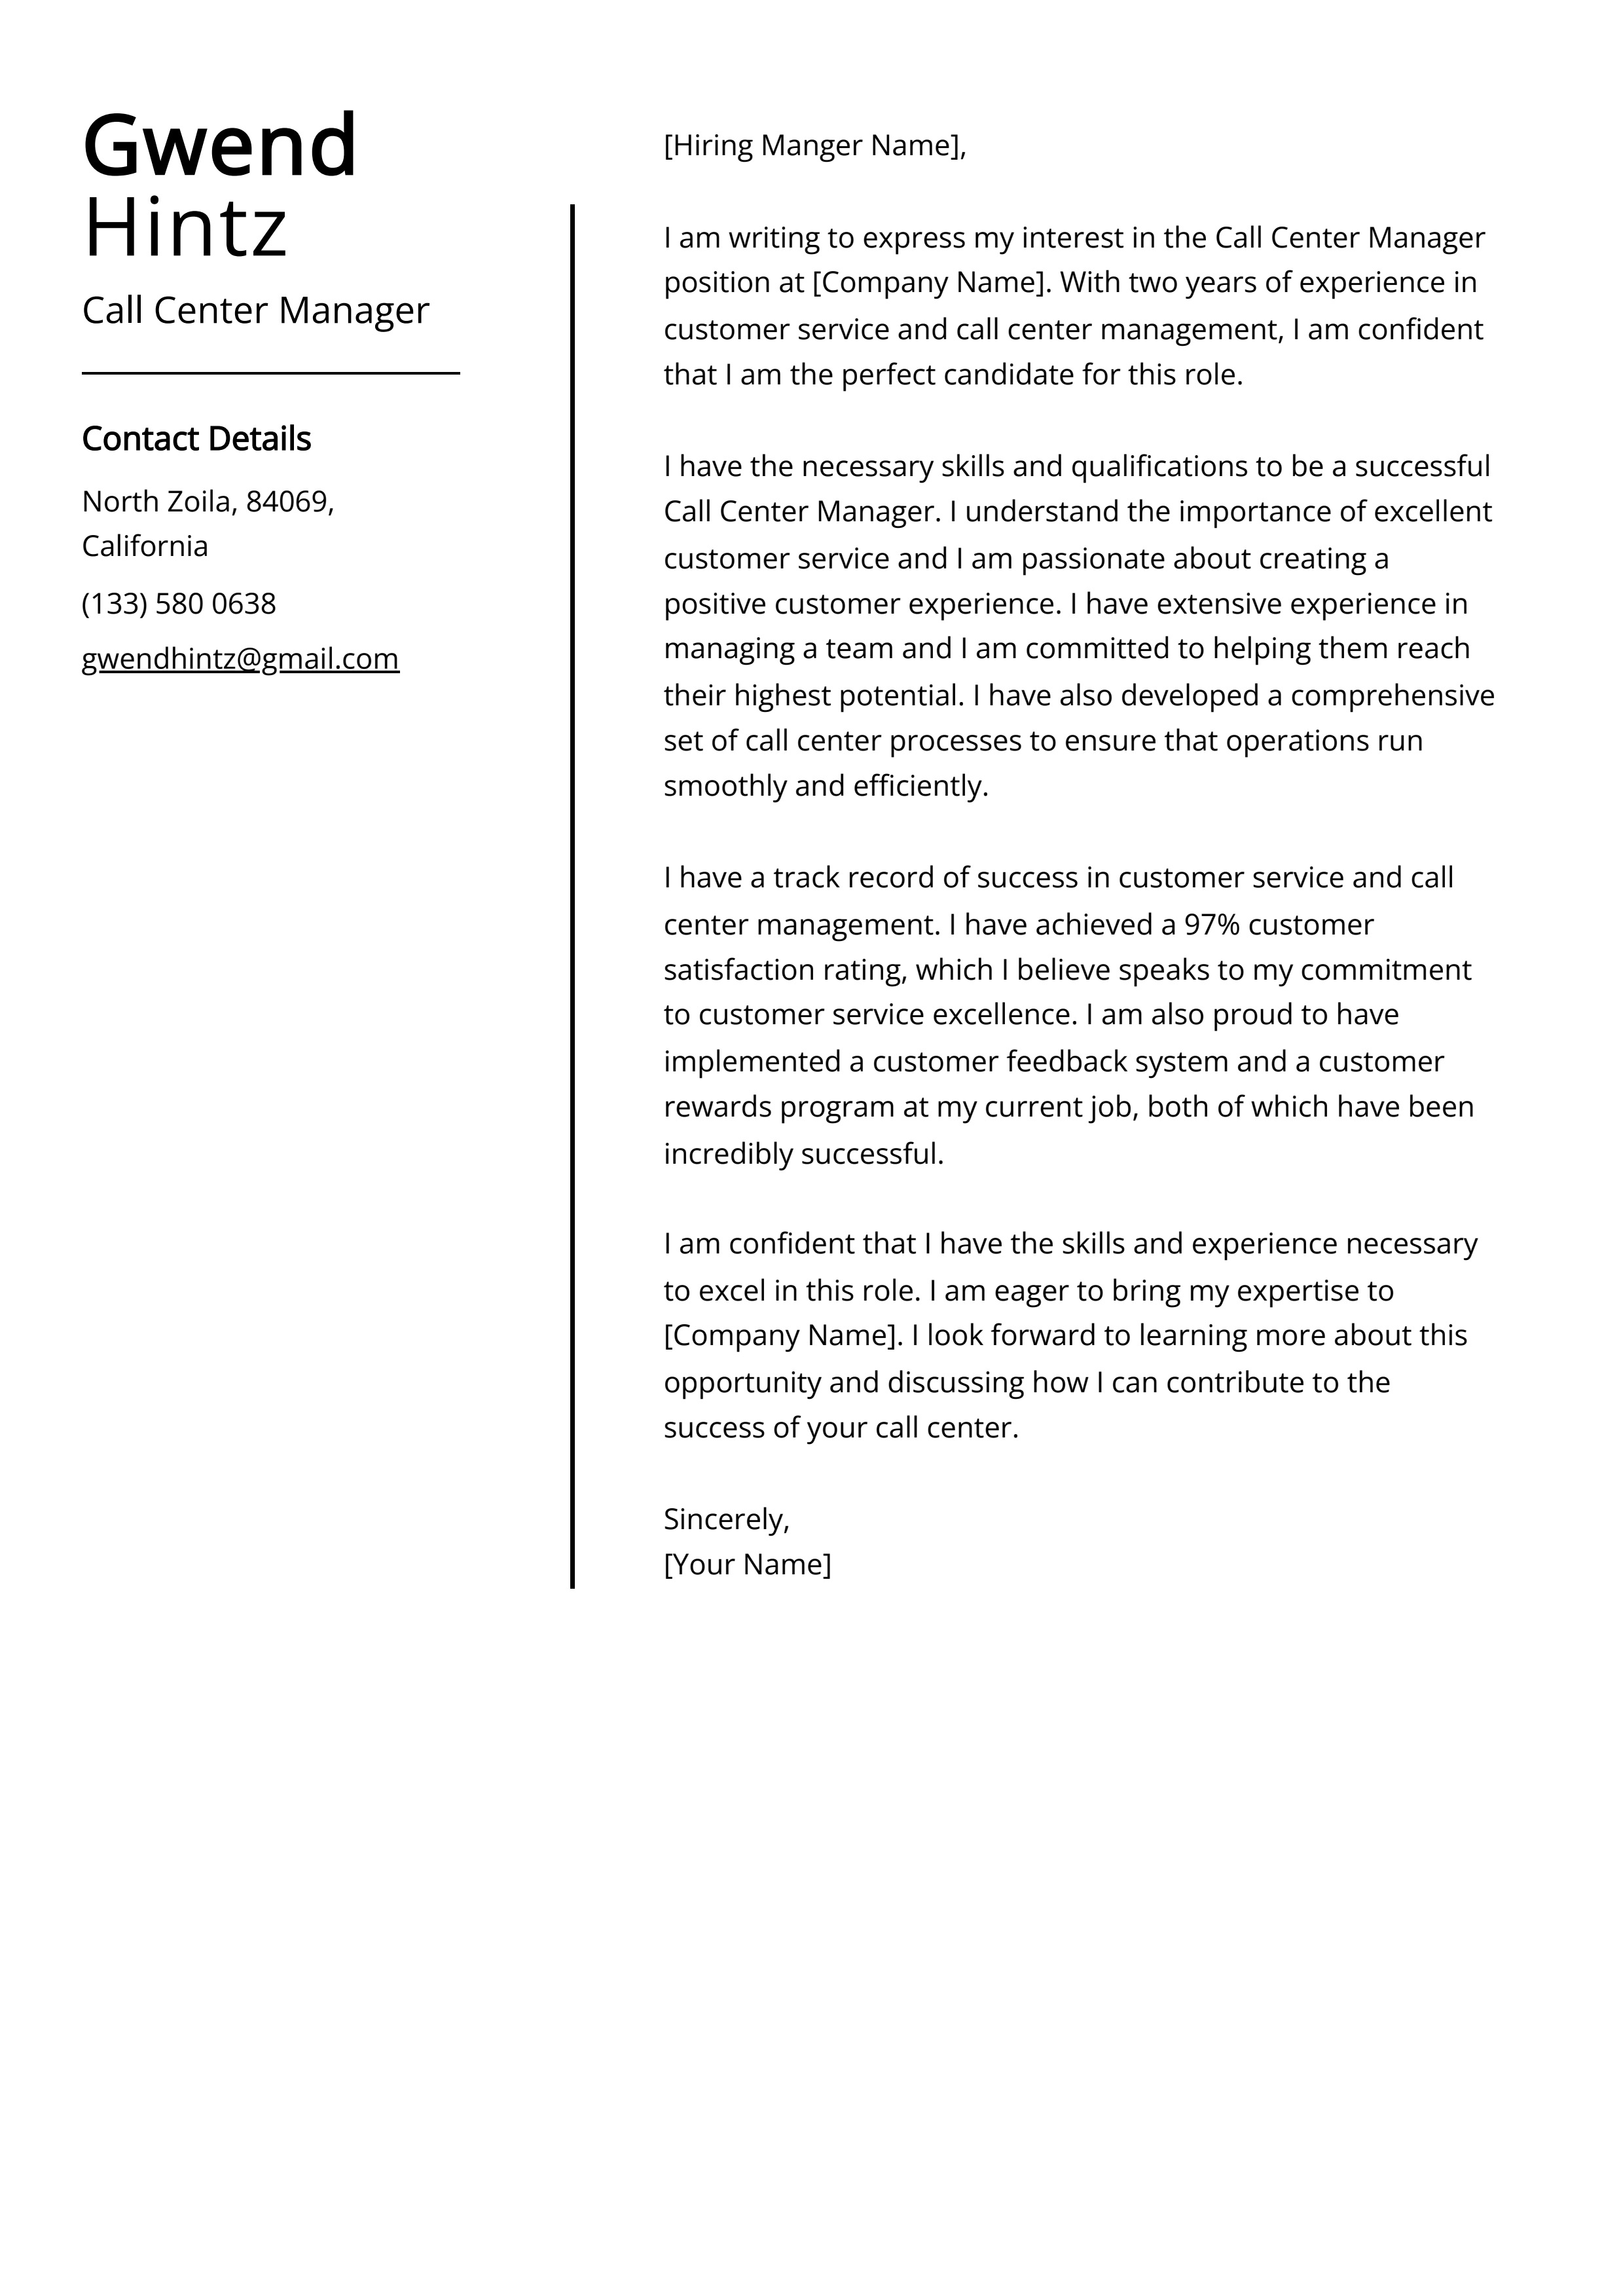 Call Center Manager Cover Letter Example